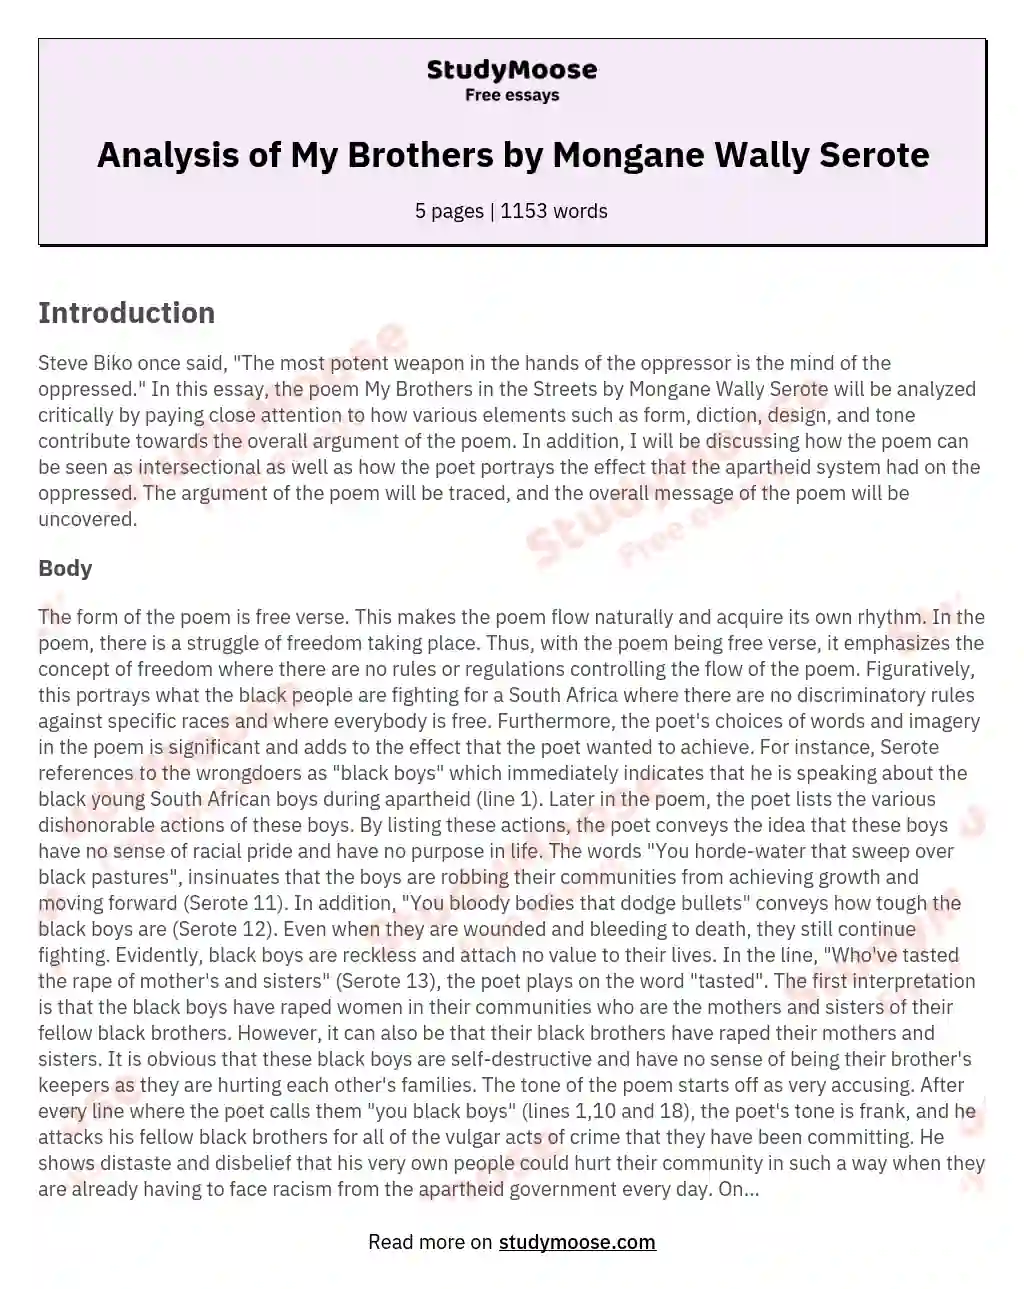 Analysis of My Brothers by Mongane Wally Serote essay